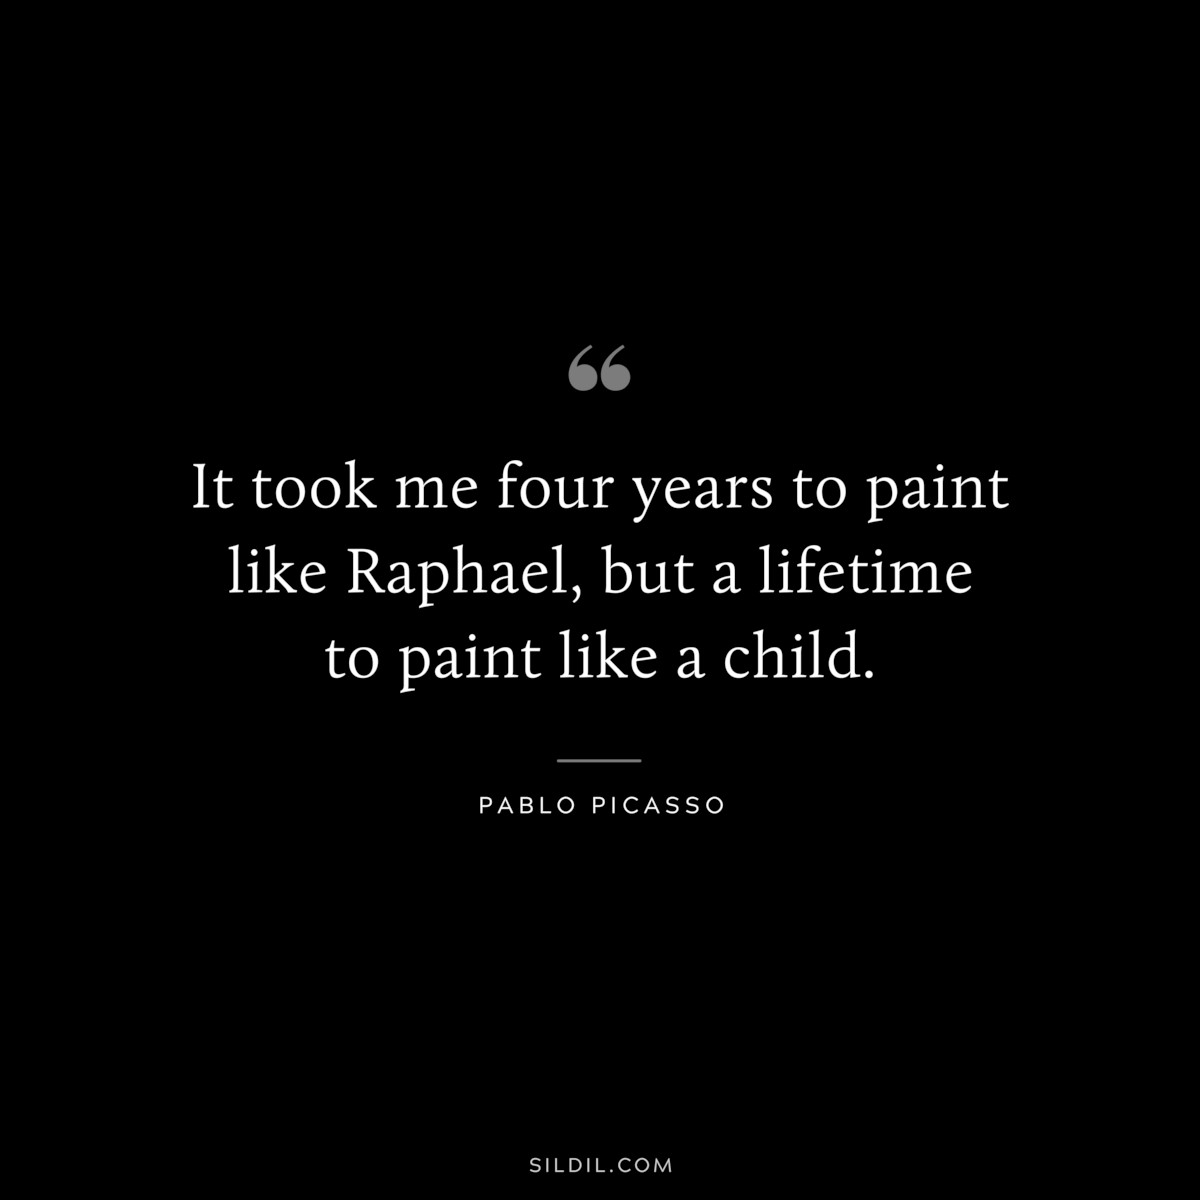 It took me four years to paint like Raphael, but a lifetime to paint like a child. ― Pablo Picasso